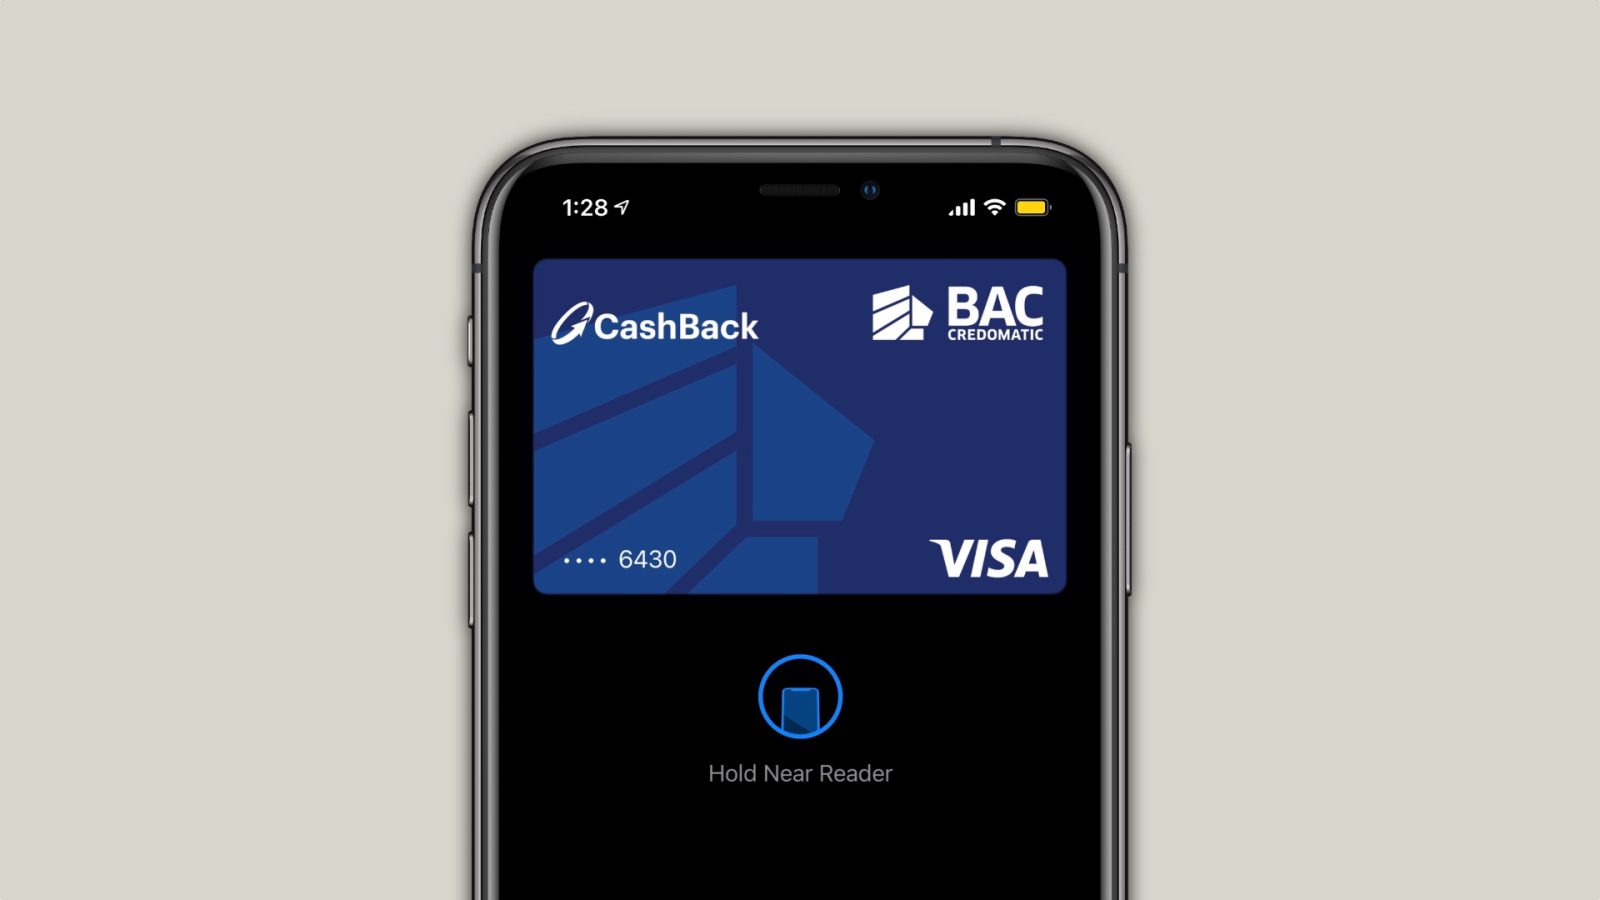 bac-credomatic-costa-rica-central-america-apple-pay-support-9to5mac-1